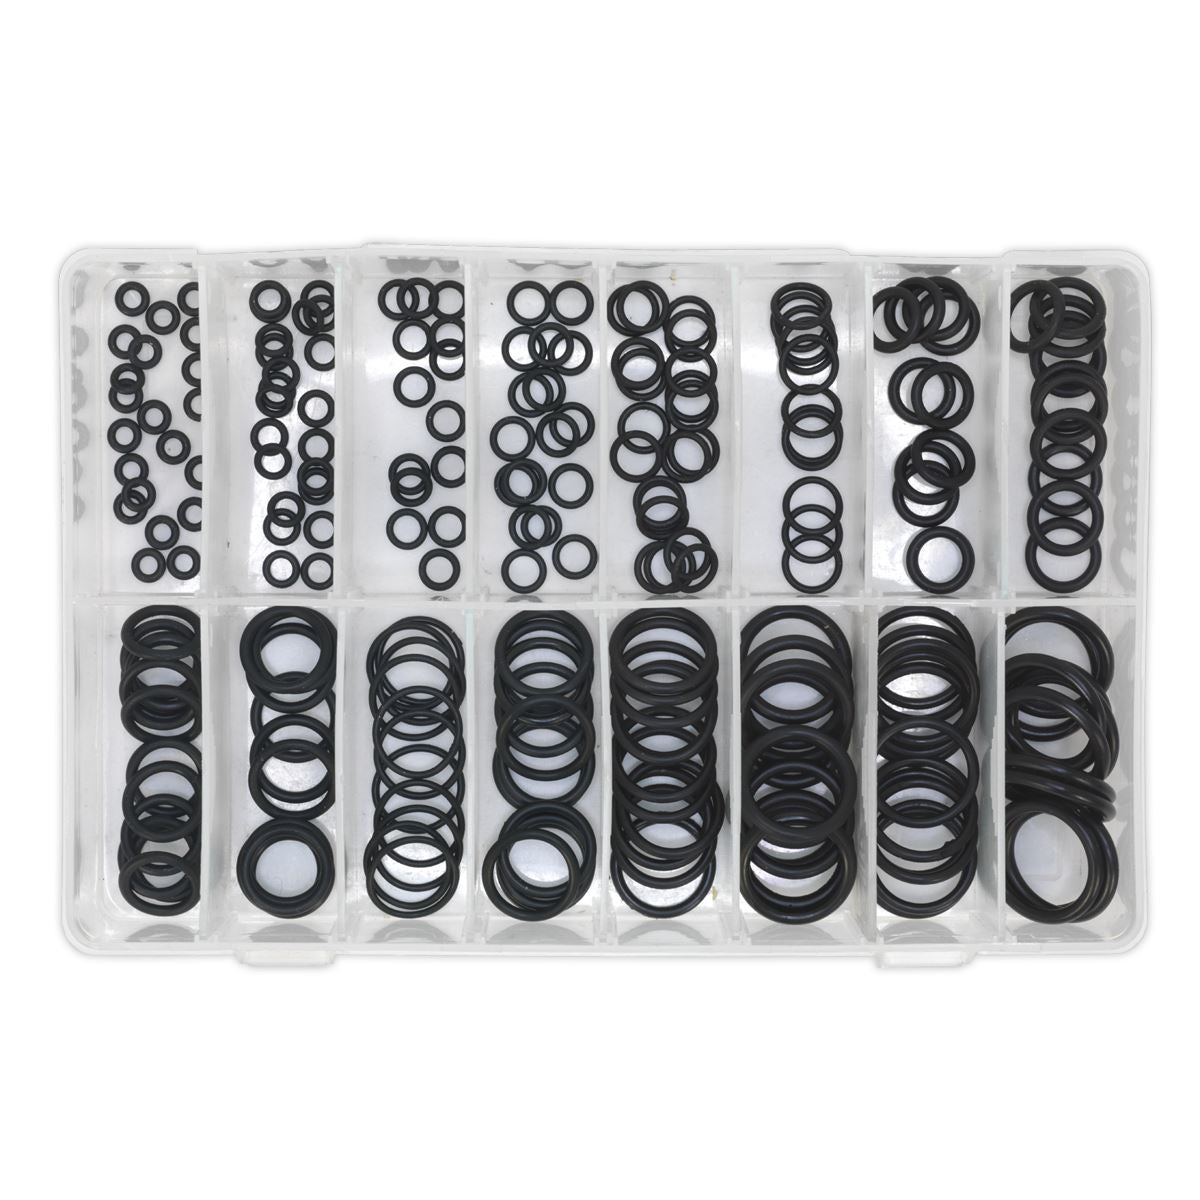 Sealey Rubber O-Ring Assortment 225pc Metric